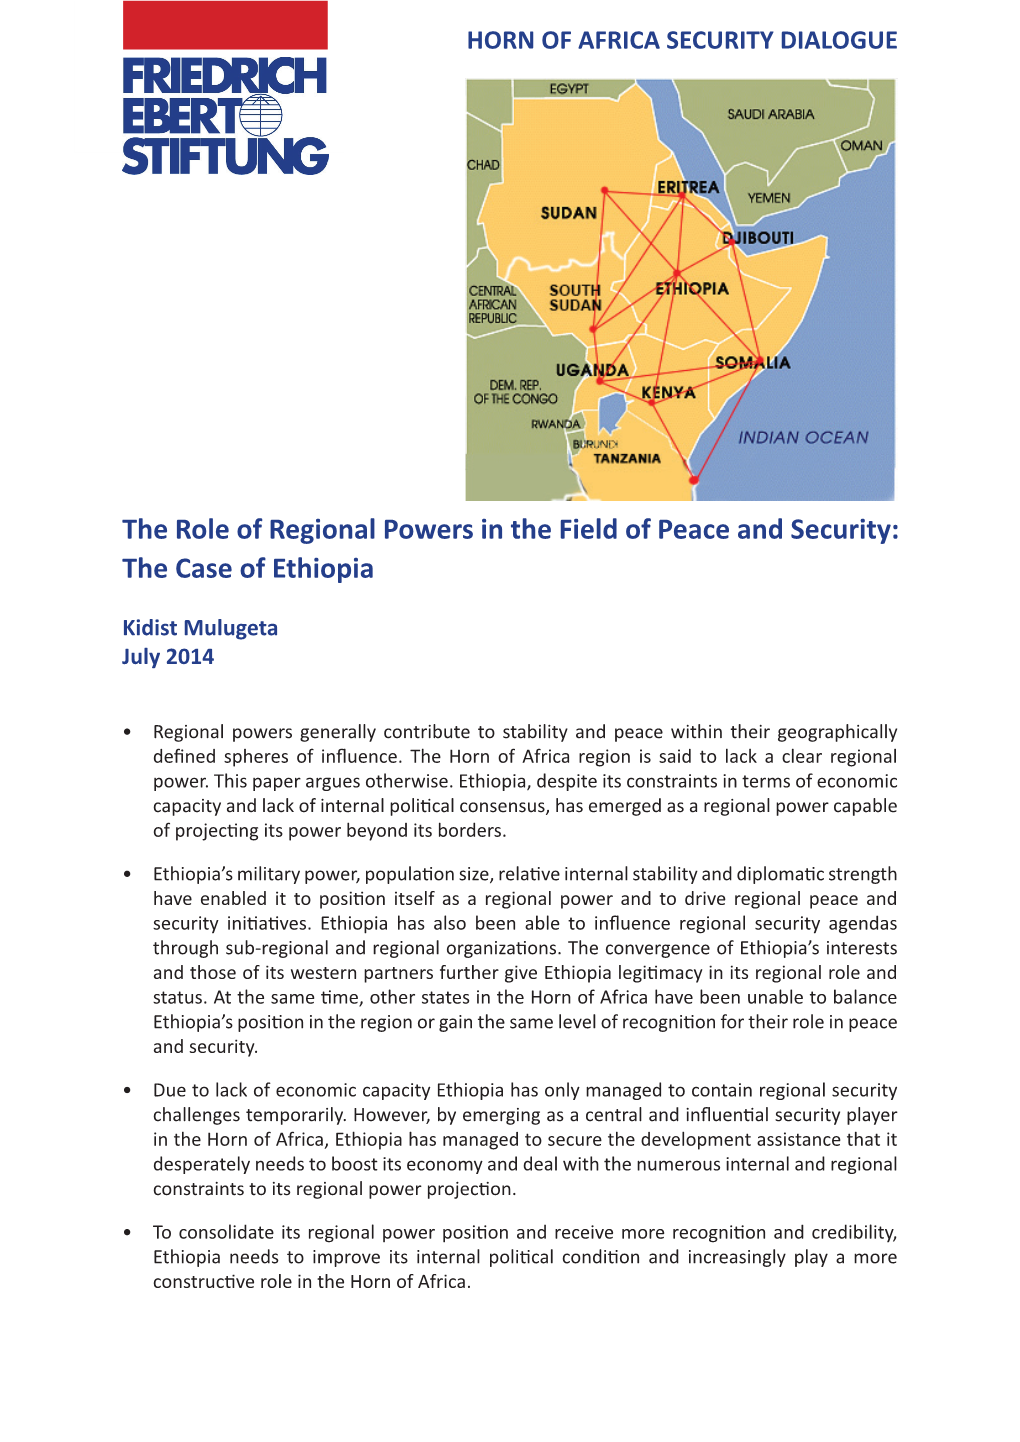 The Role of Regional Powers in the Field of Peace and Security: the Case of Ethiopia